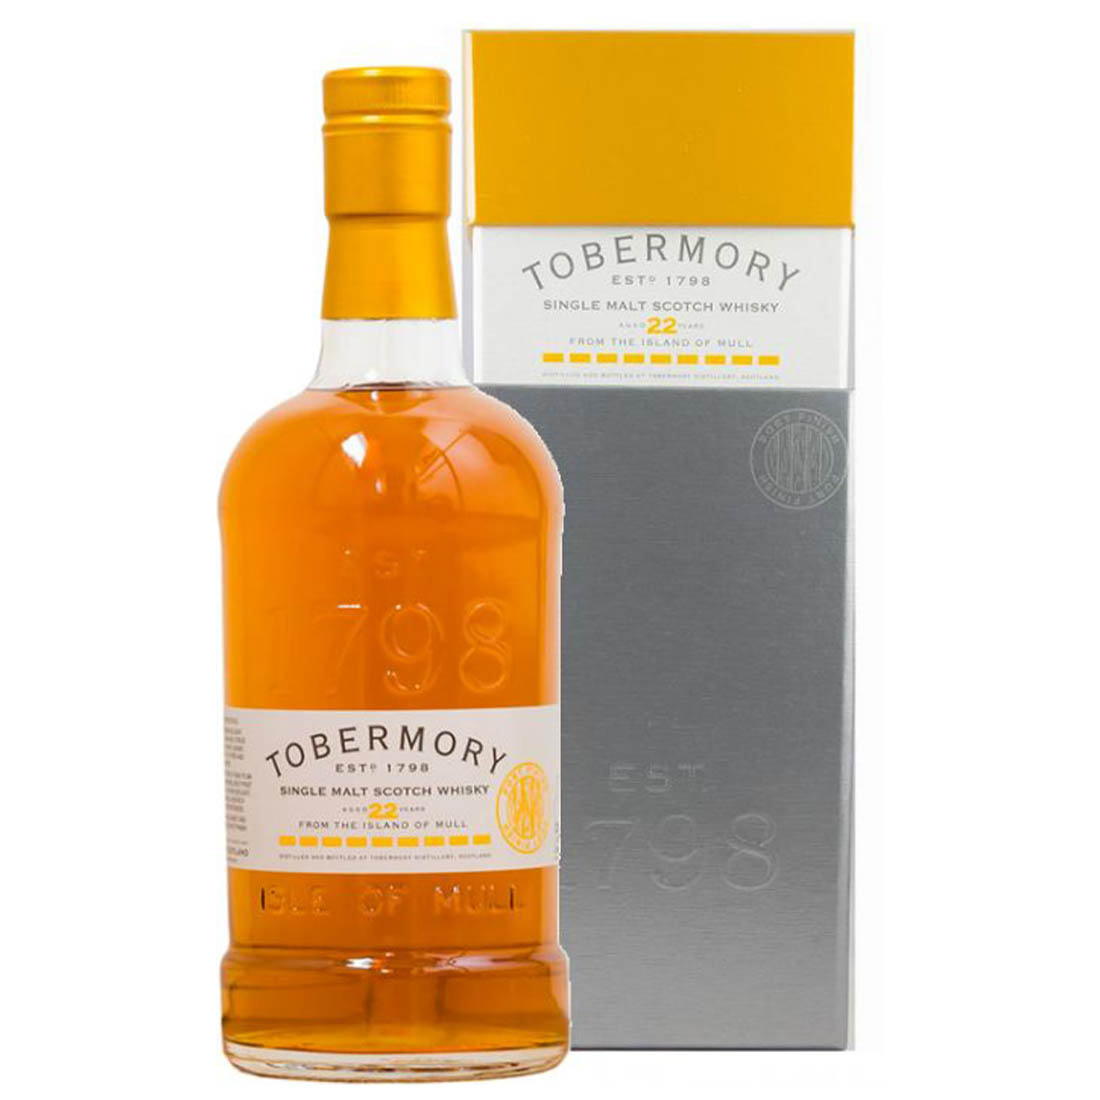 Tobermory 22 Year Old Port Cask Finish